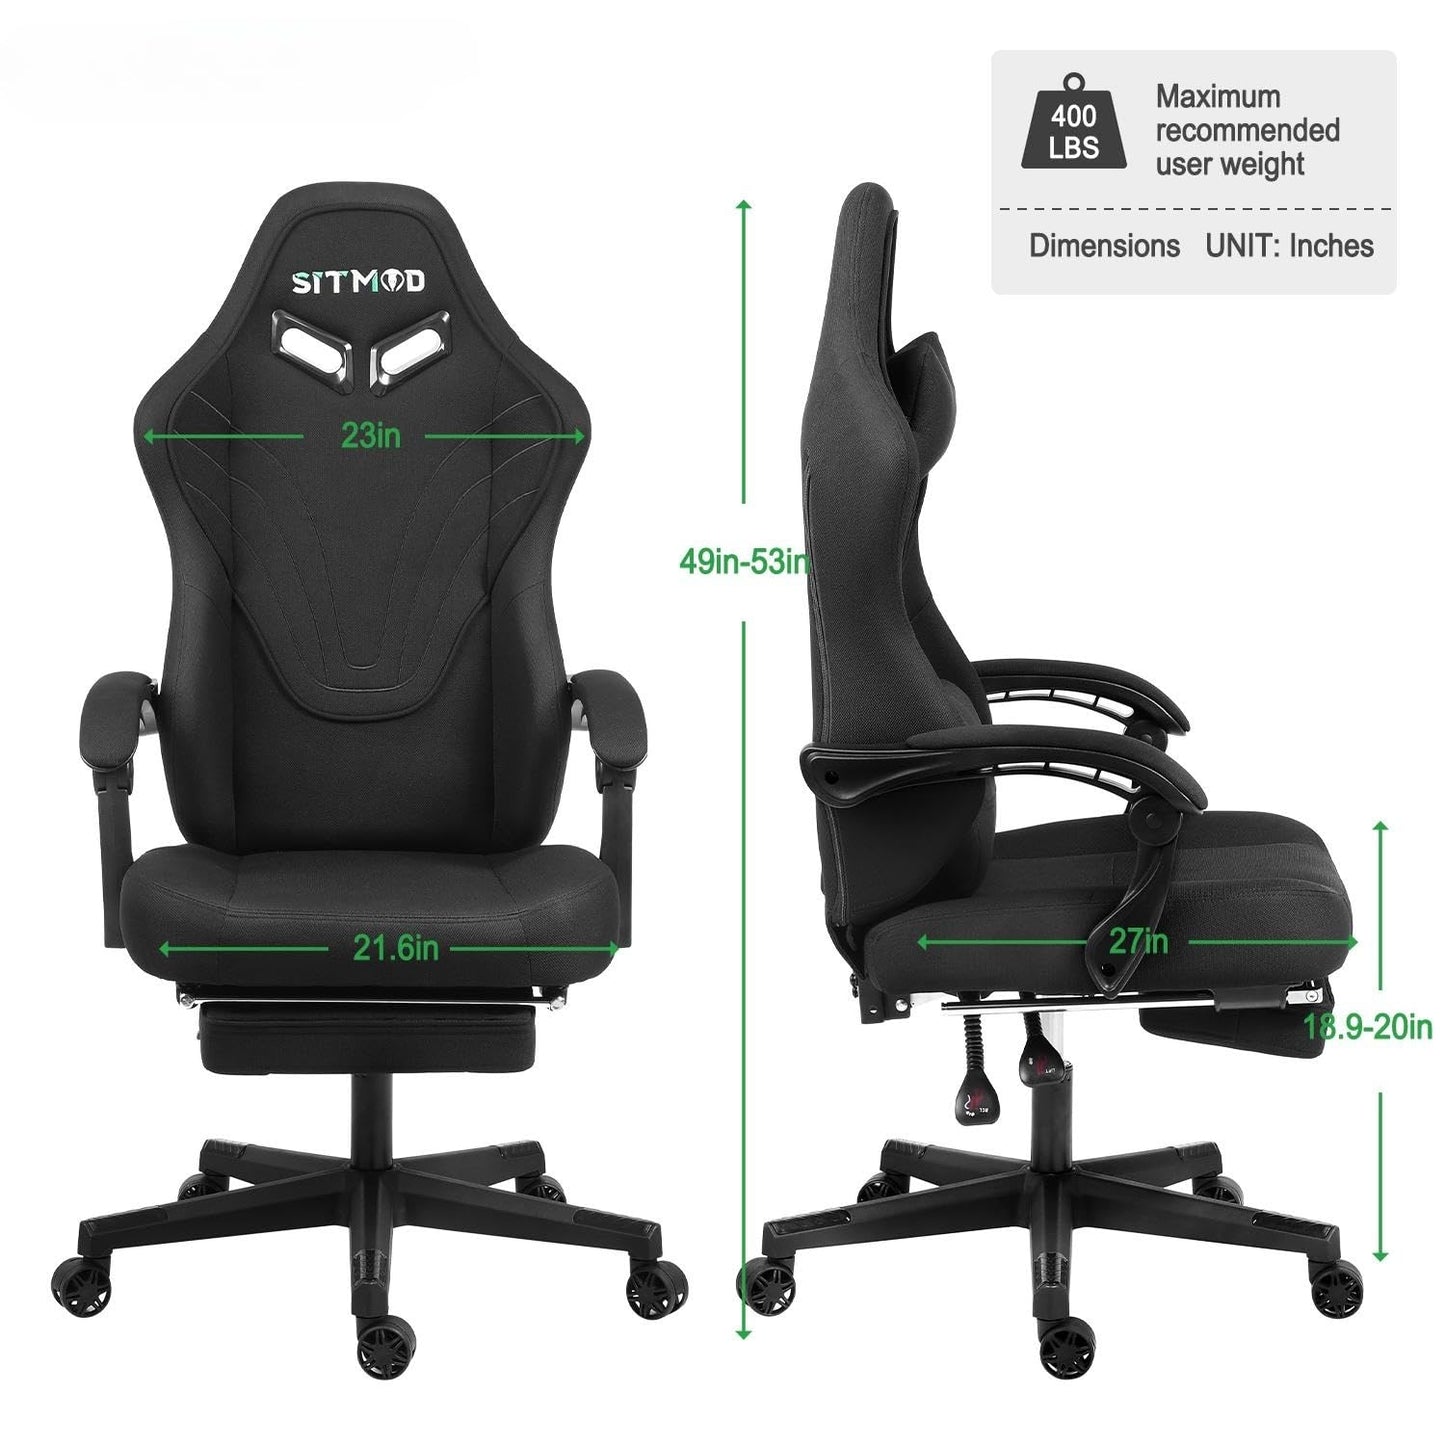 Ulody Gaming Chair,Big and Tall Gaming Chair with Footrest,Ergonomic Computer Chair,Fabric Office Chair with Lumbar Support,360 Degree Swivel and Height Adjustment,Video Gaming Chair for Adults-Black